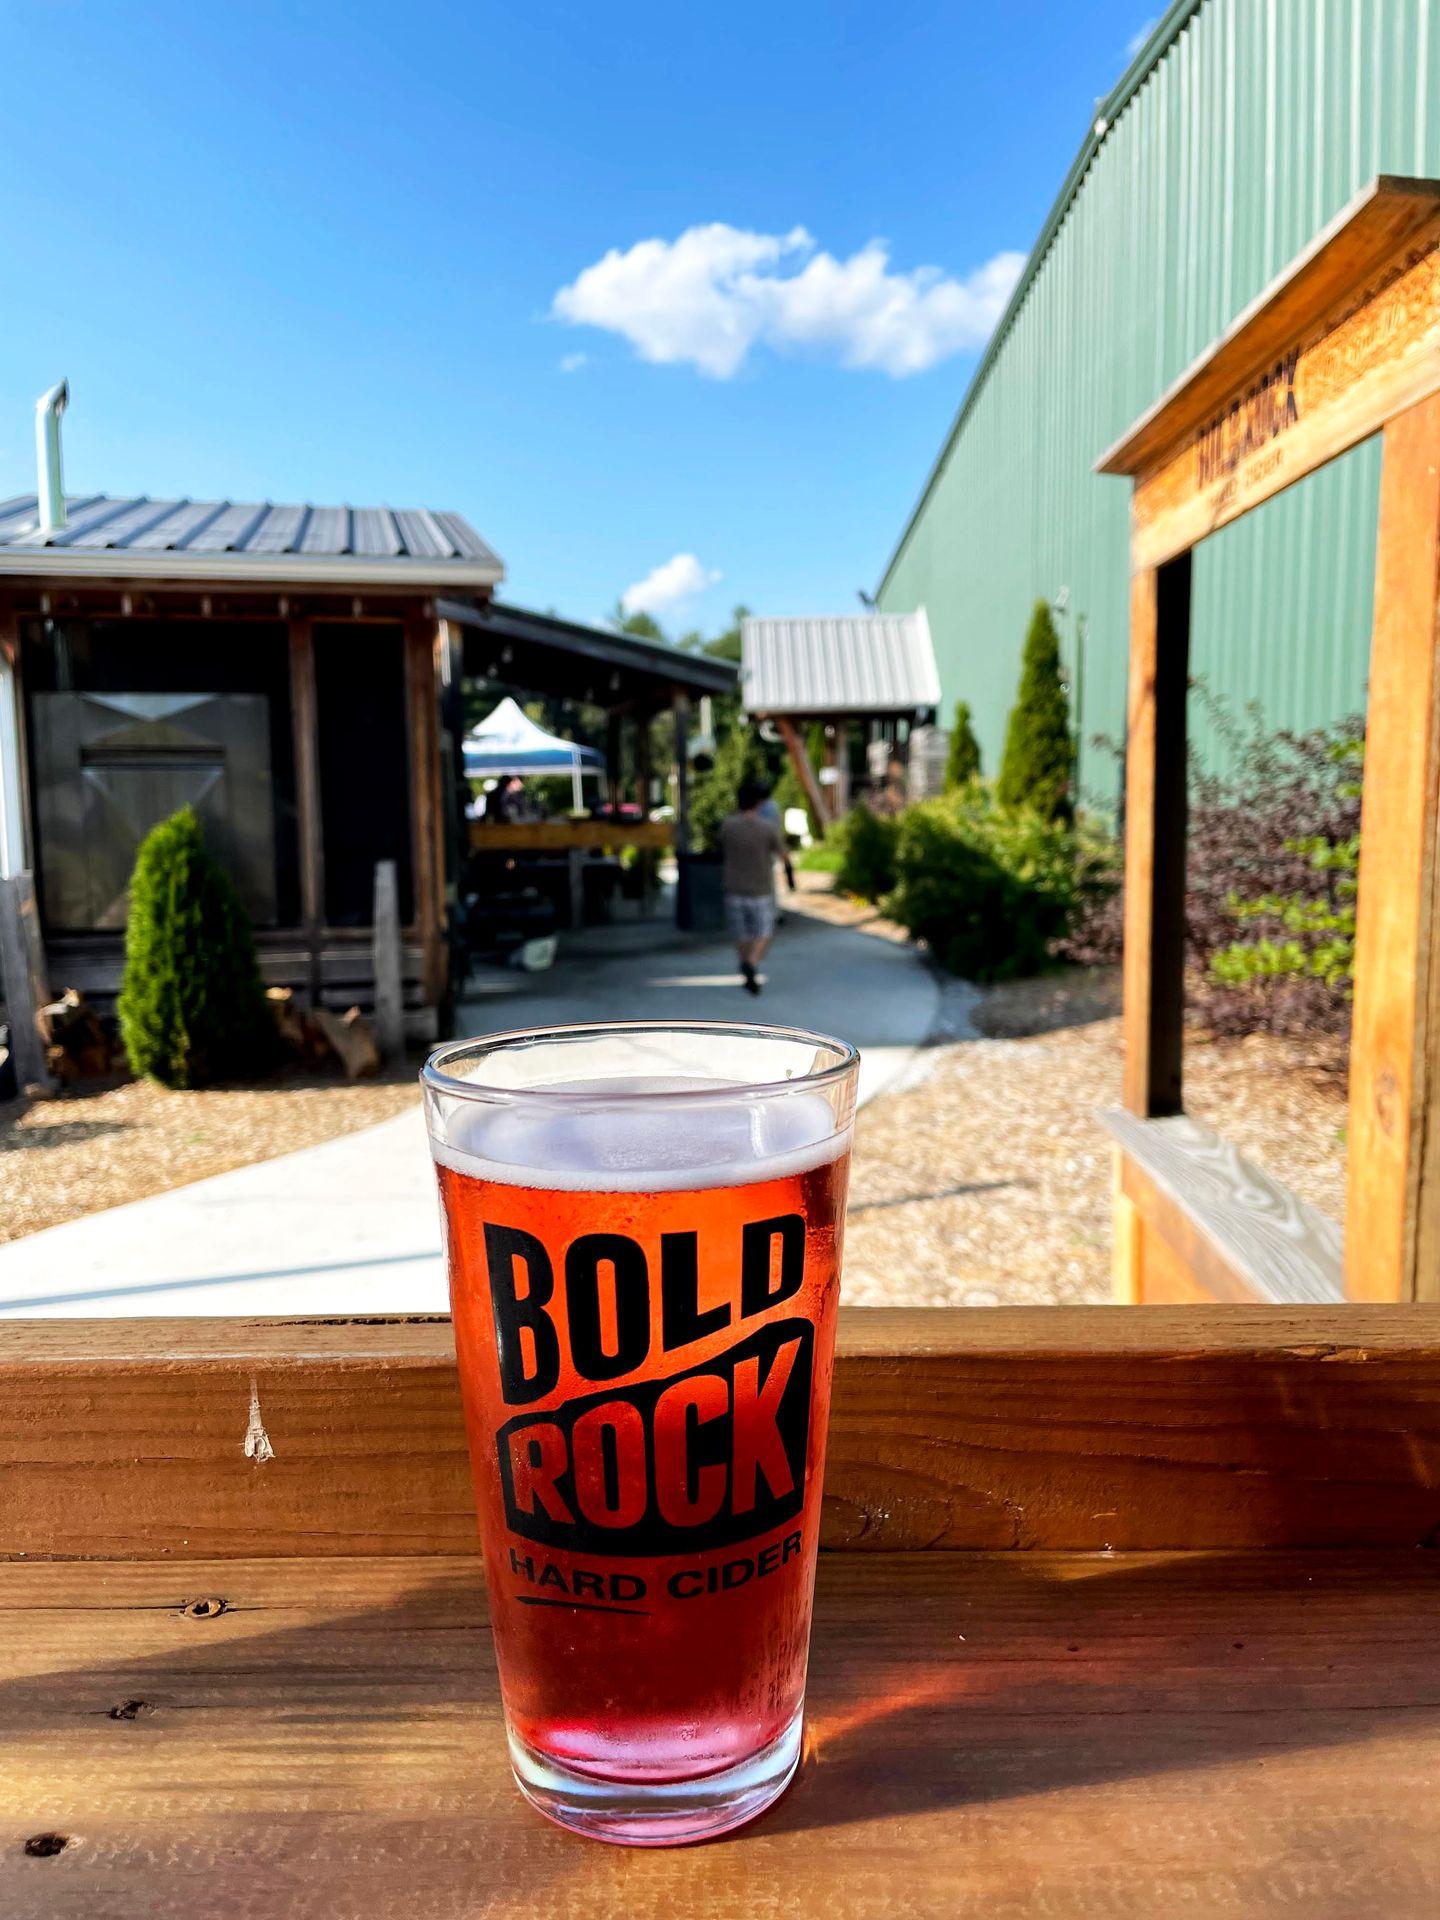 A glass of hard cider at Bold Rock Mills River Cidery.